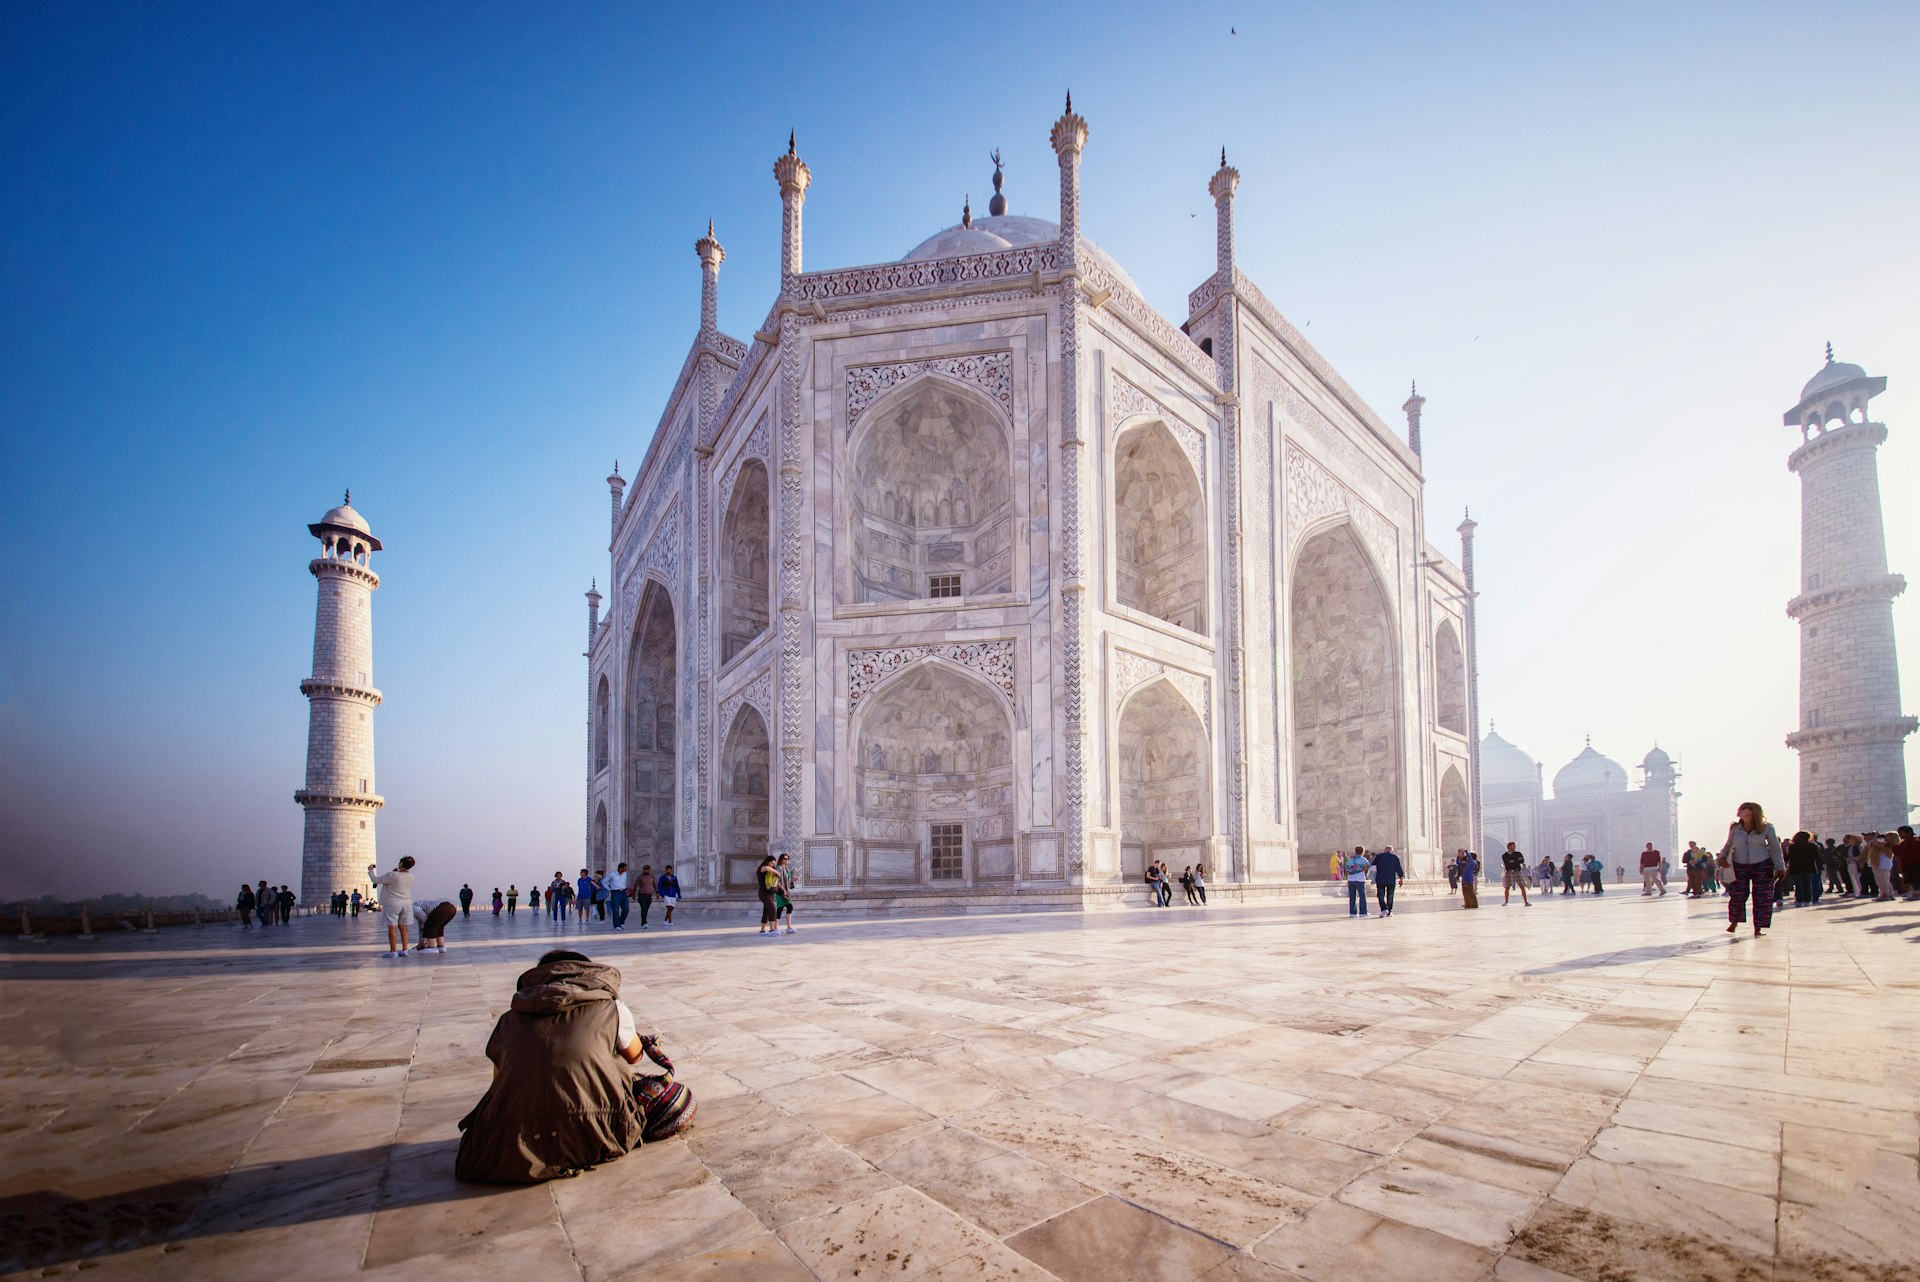 A man sits on the ground in front of the Taj Mahal in the early hours of the morning while other tourists walk around the outside of the monument.